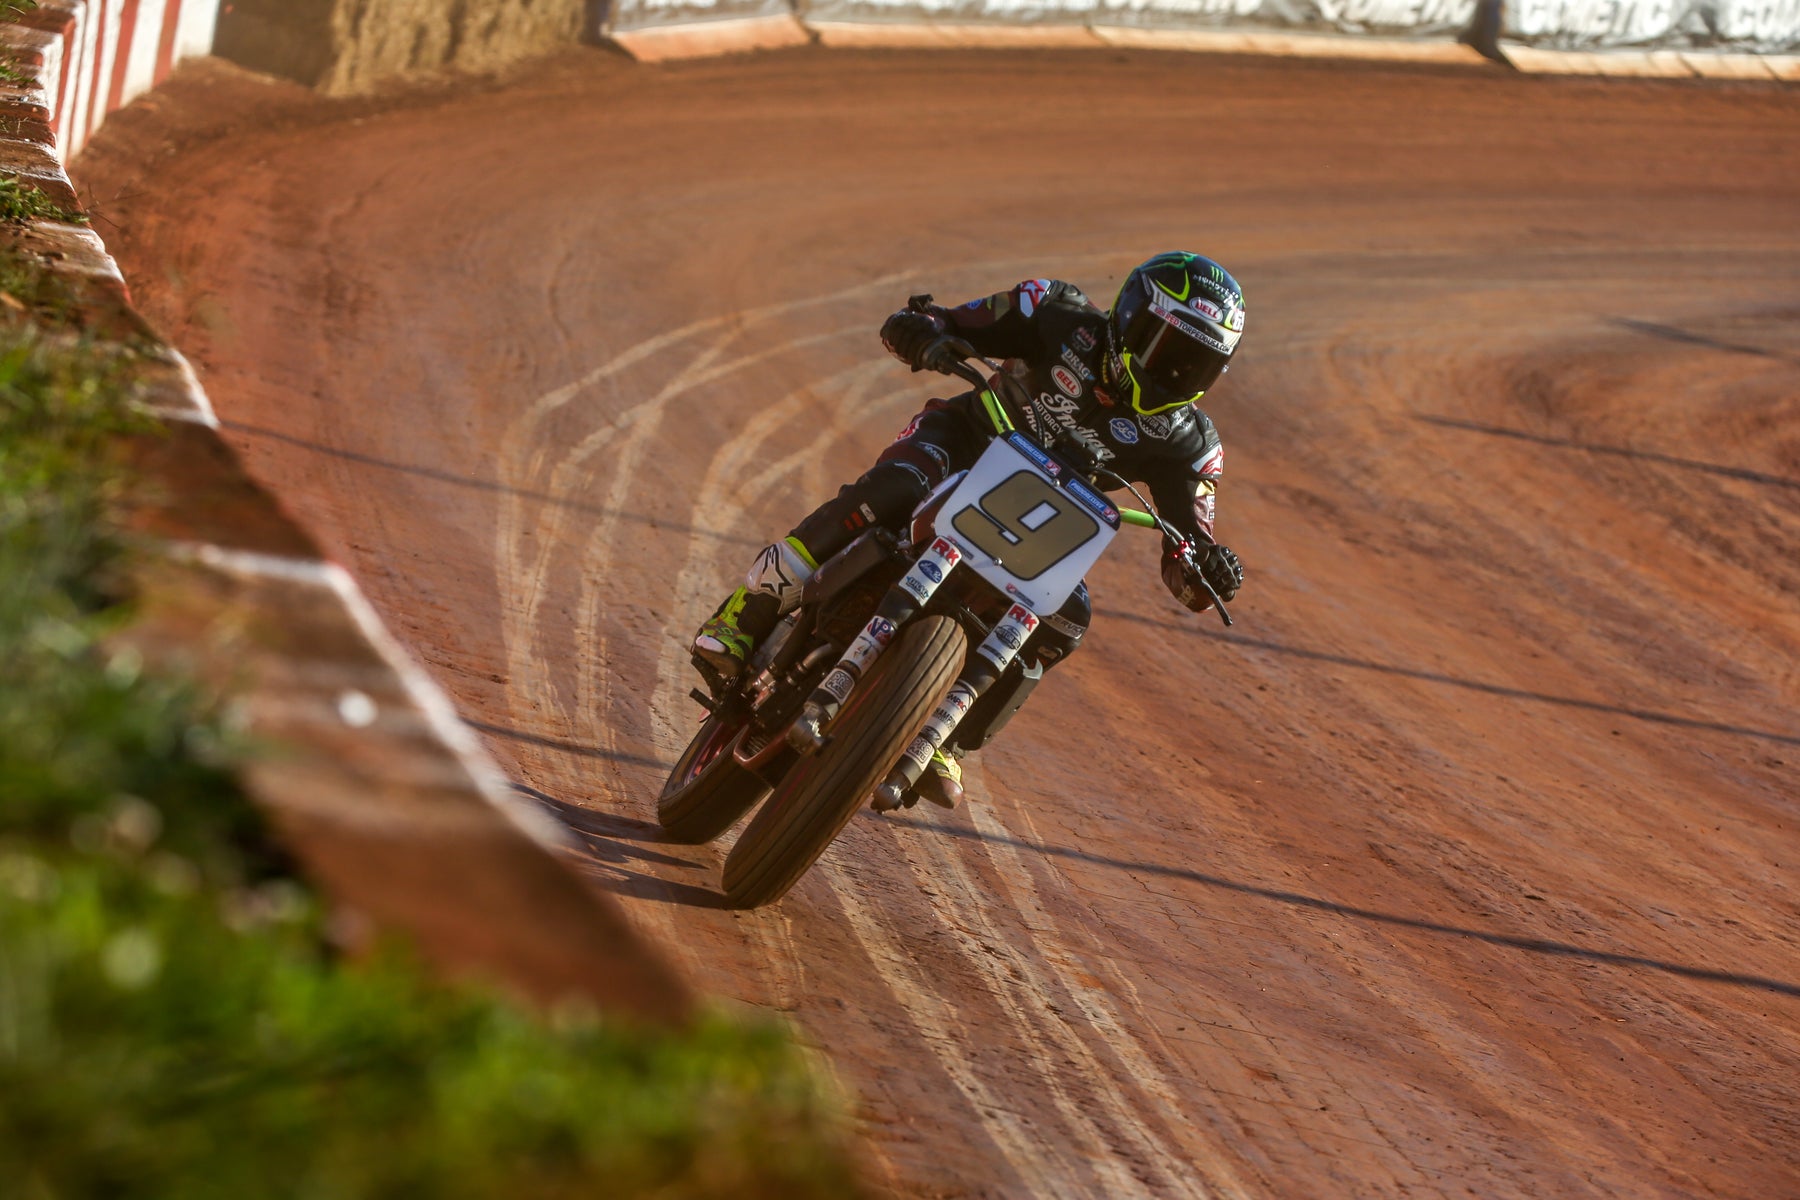 JARED MEES DOES DIXIE DOUBLE AFTER WINNING BOTH AFT FLAT-TRACK FEATURE RACES AT WOODSTOCK, GEORGIA